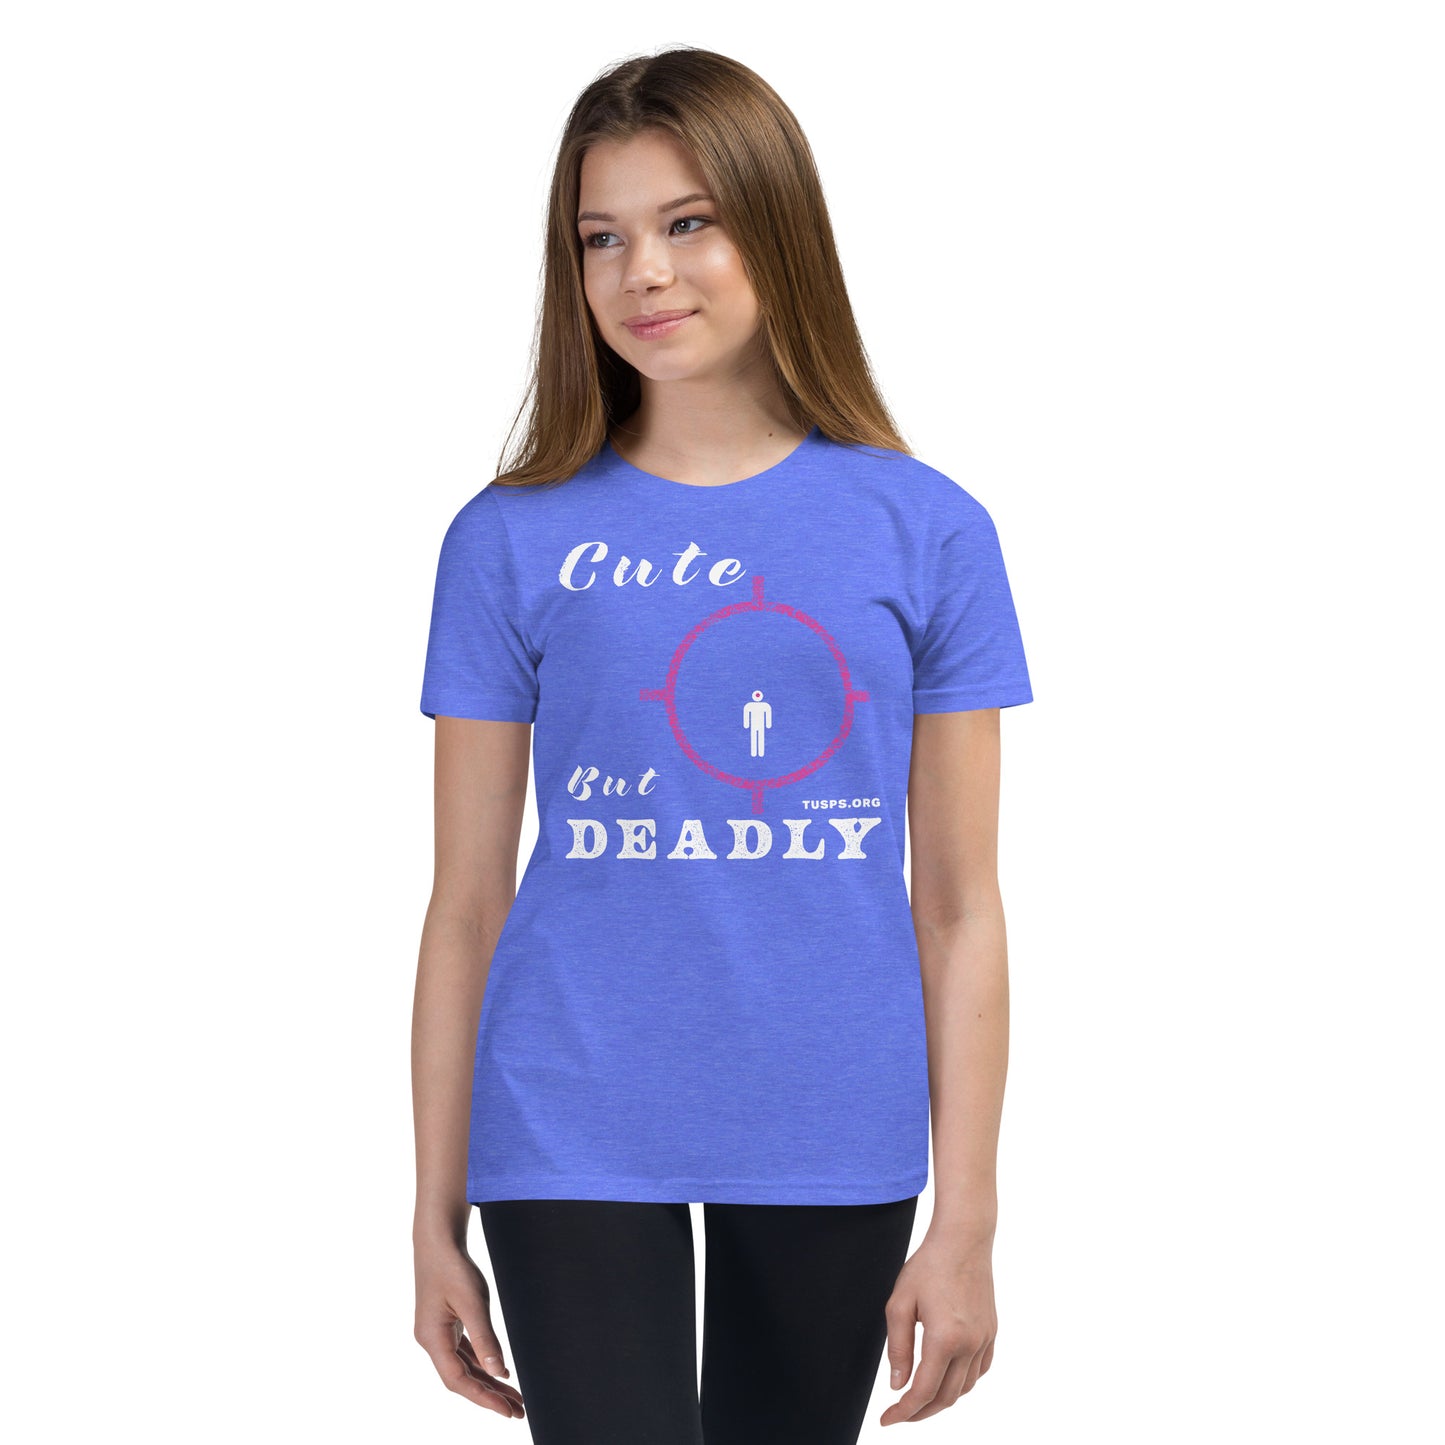 YOUTH - CUTE BUT DEADLY TEE